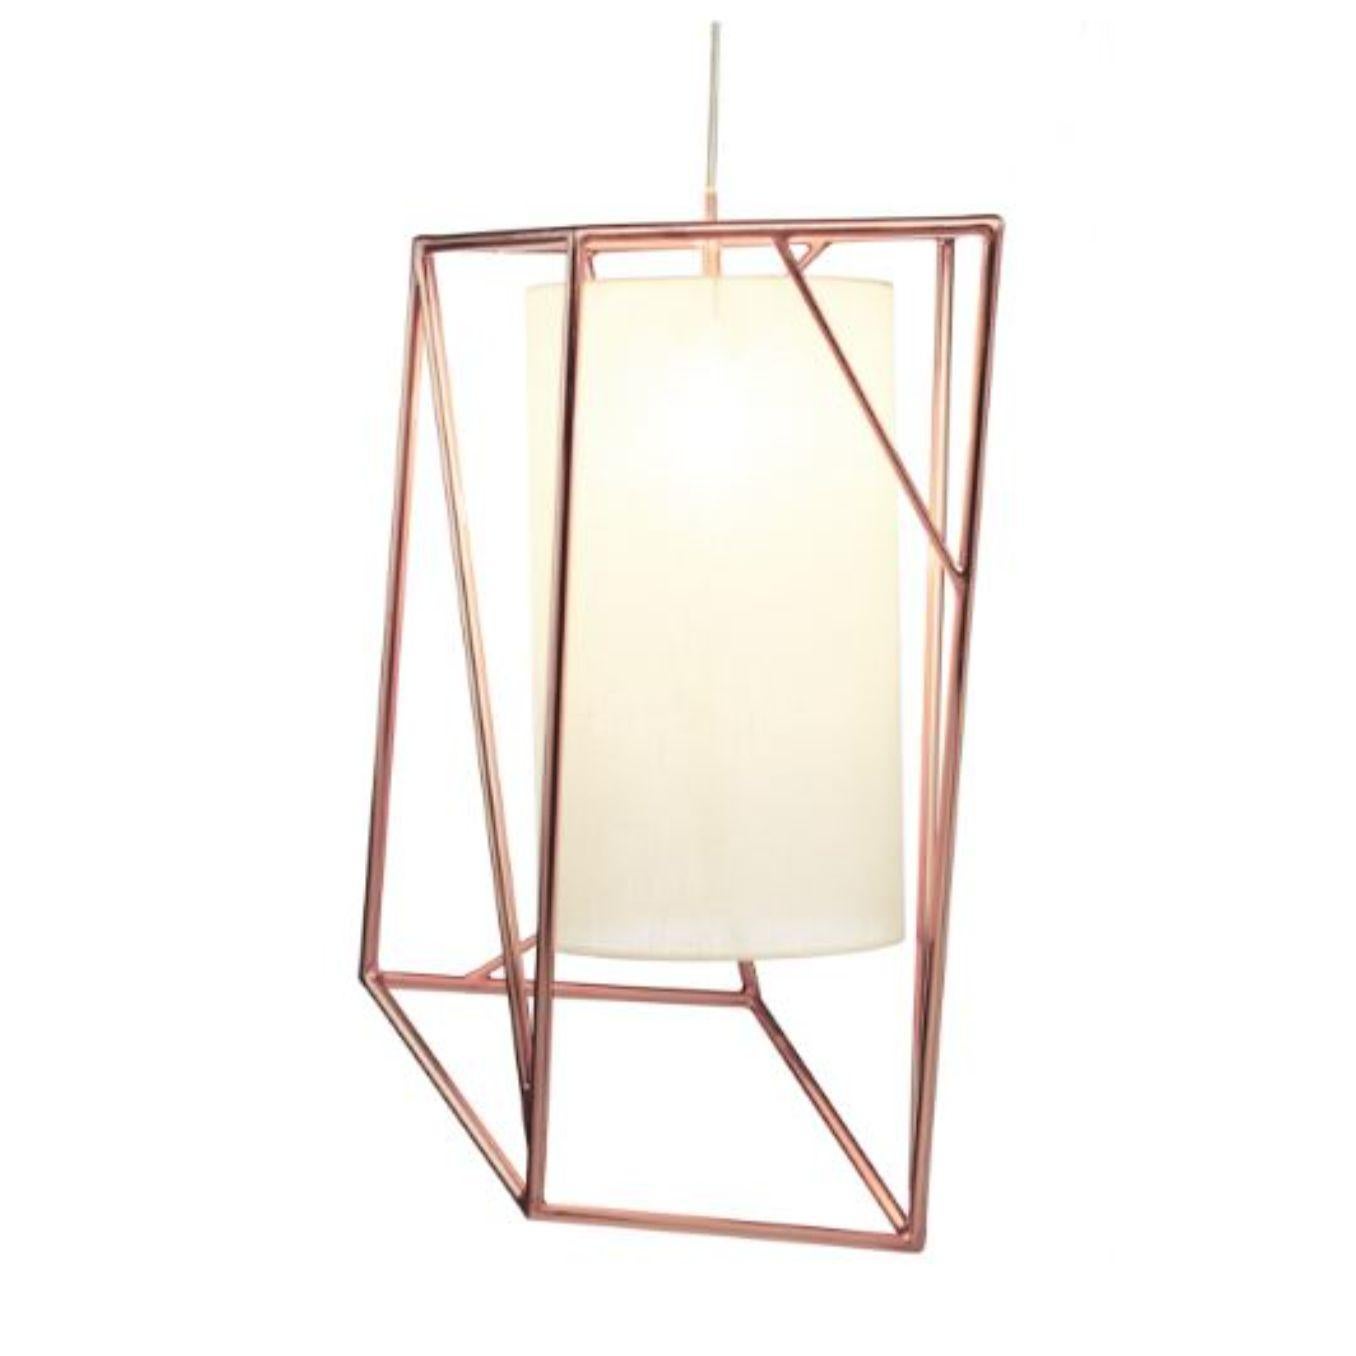 Copper star II suspension lamp by Dooq
Dimensions: W 45 x D 45 x H 72 cm
Materials: lacquered metal, polished or satin metal, copper.
Also available in different colors and materials.

Information:
230V/50Hz
E27/1x20W